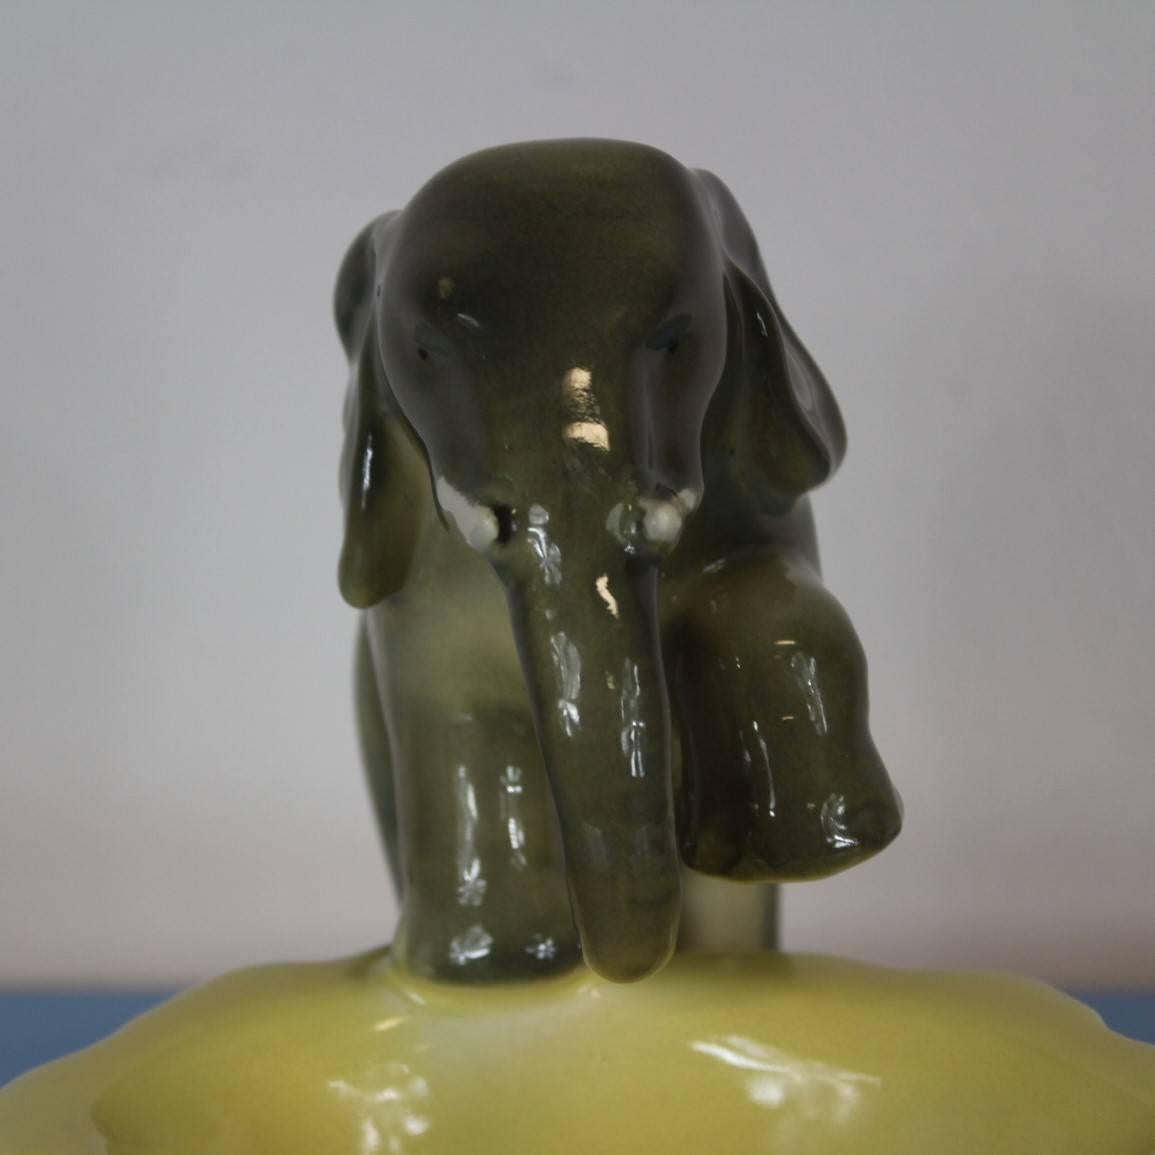 Bowl with elephant sculpture made in the 1930s in Trnovany, Czechoslovakia. It is made from glazed ceramic, signed TTT Czechoslovakia. Very good original condition.